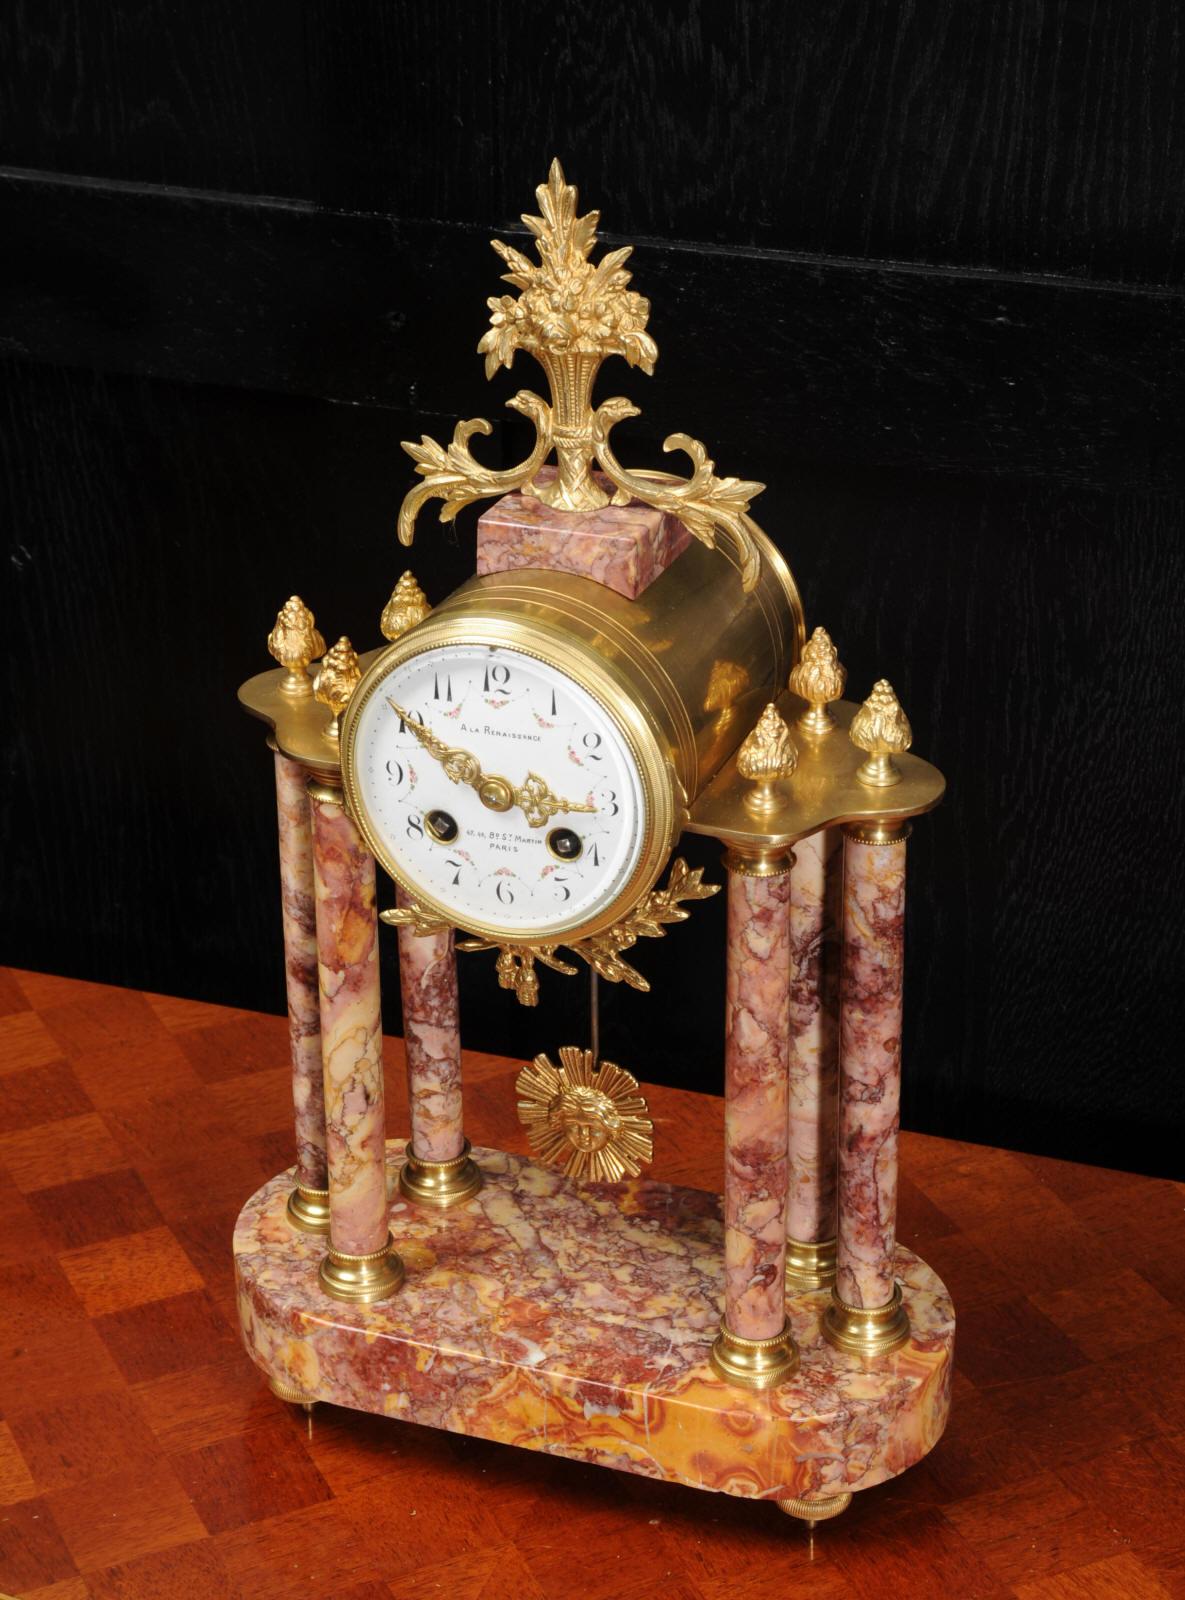 A stunning antique French portico clock, circa 1900. It is made of the most beautiful variegated specimen marble, with variegated reds and oranges, mounted with finely finished ormolu (gilded bronze). It is classical in style, the clock is mounted